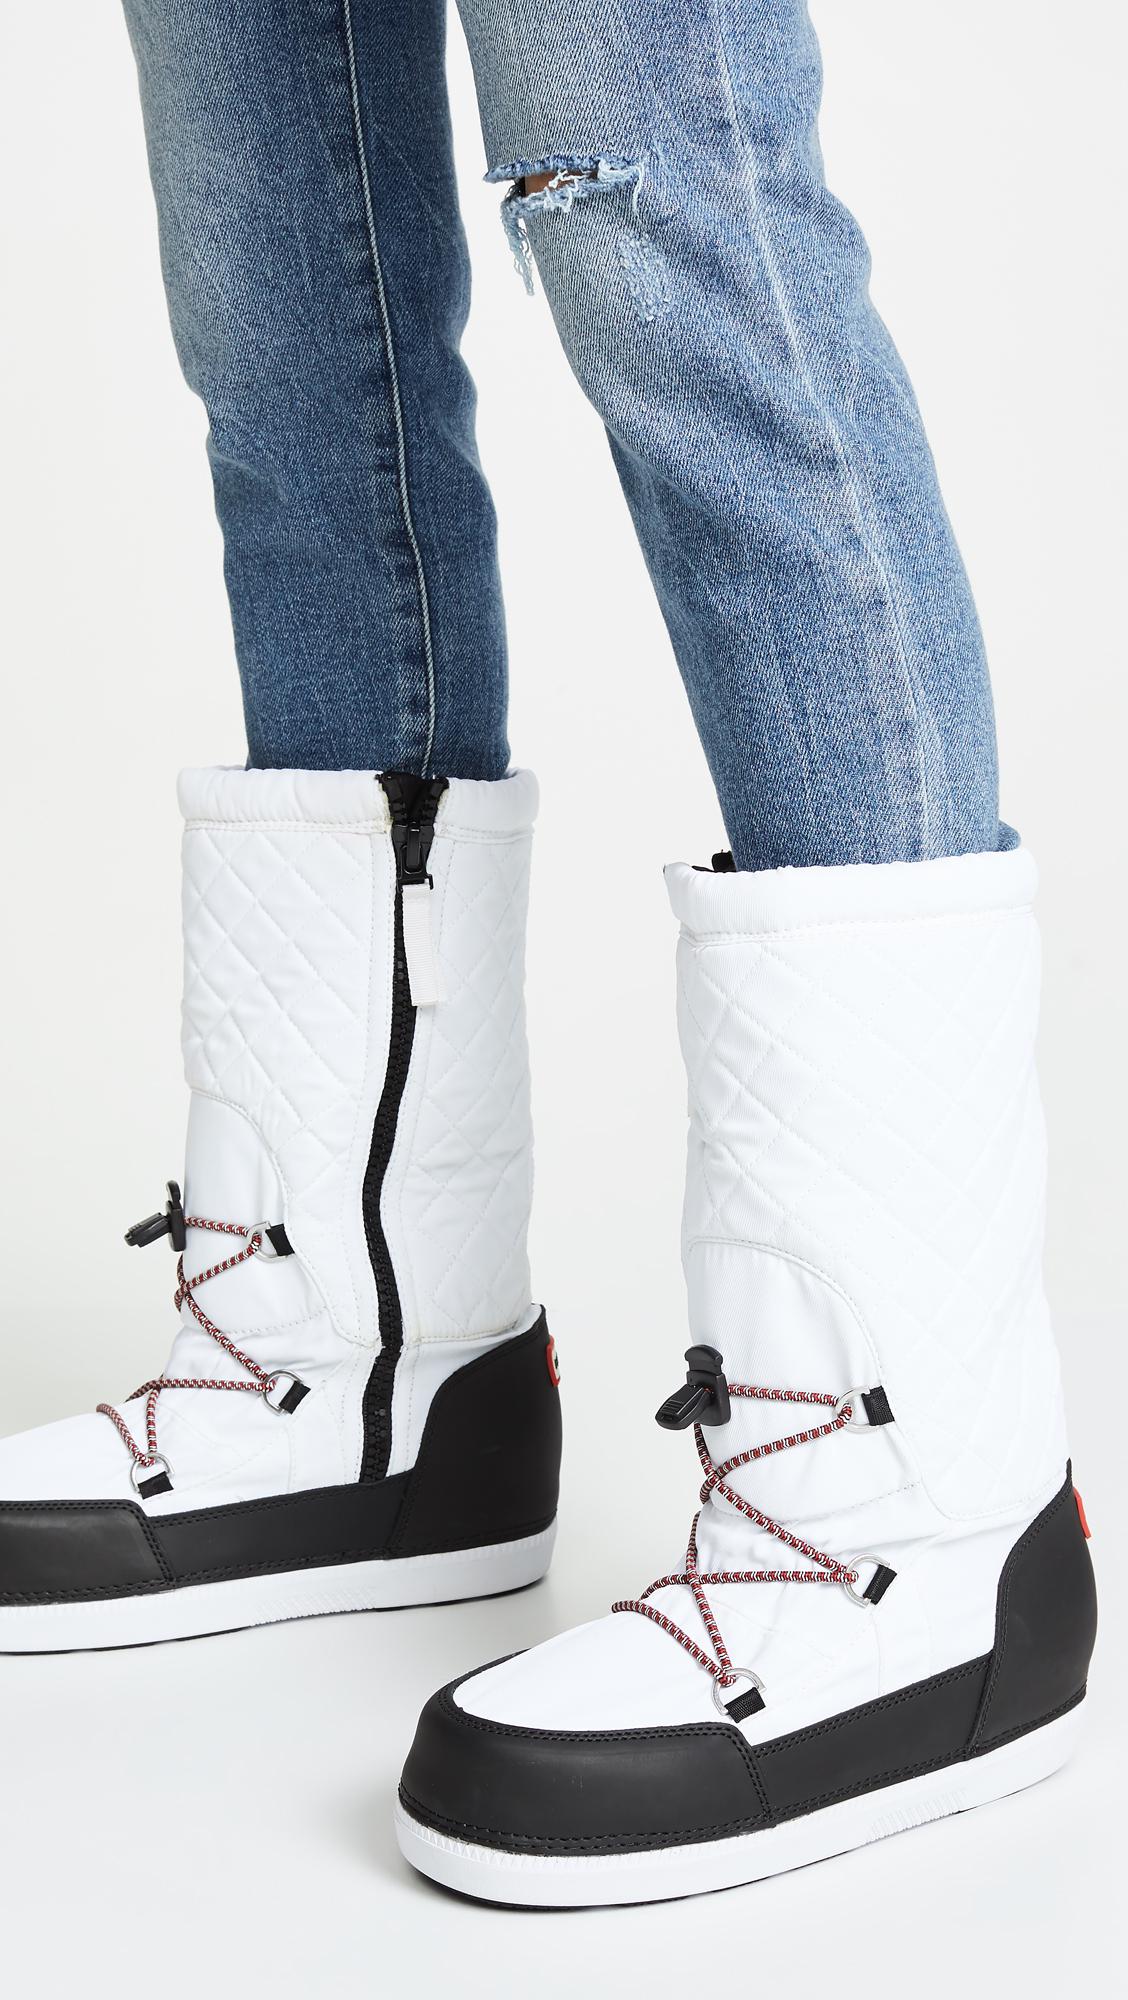 HUNTER Original Snow Quilted Boots in White/Black (White) - Lyst